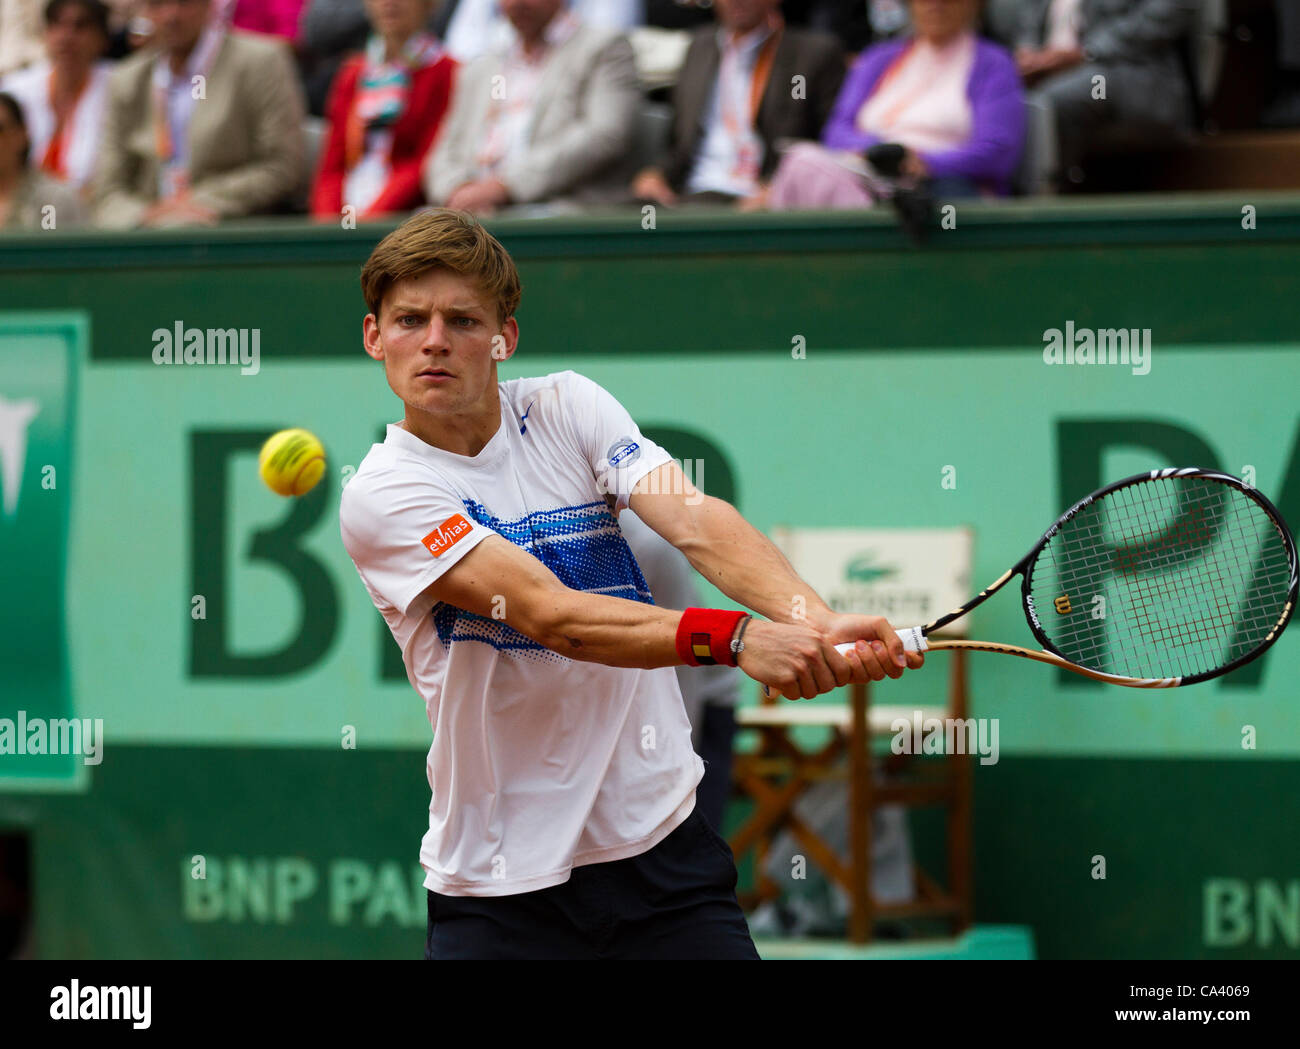 03.06.2012 Paris, France. David Goffin in action against Roger Federer on day 8 of the French Open Tennis from Roland Garros. Stock Photo